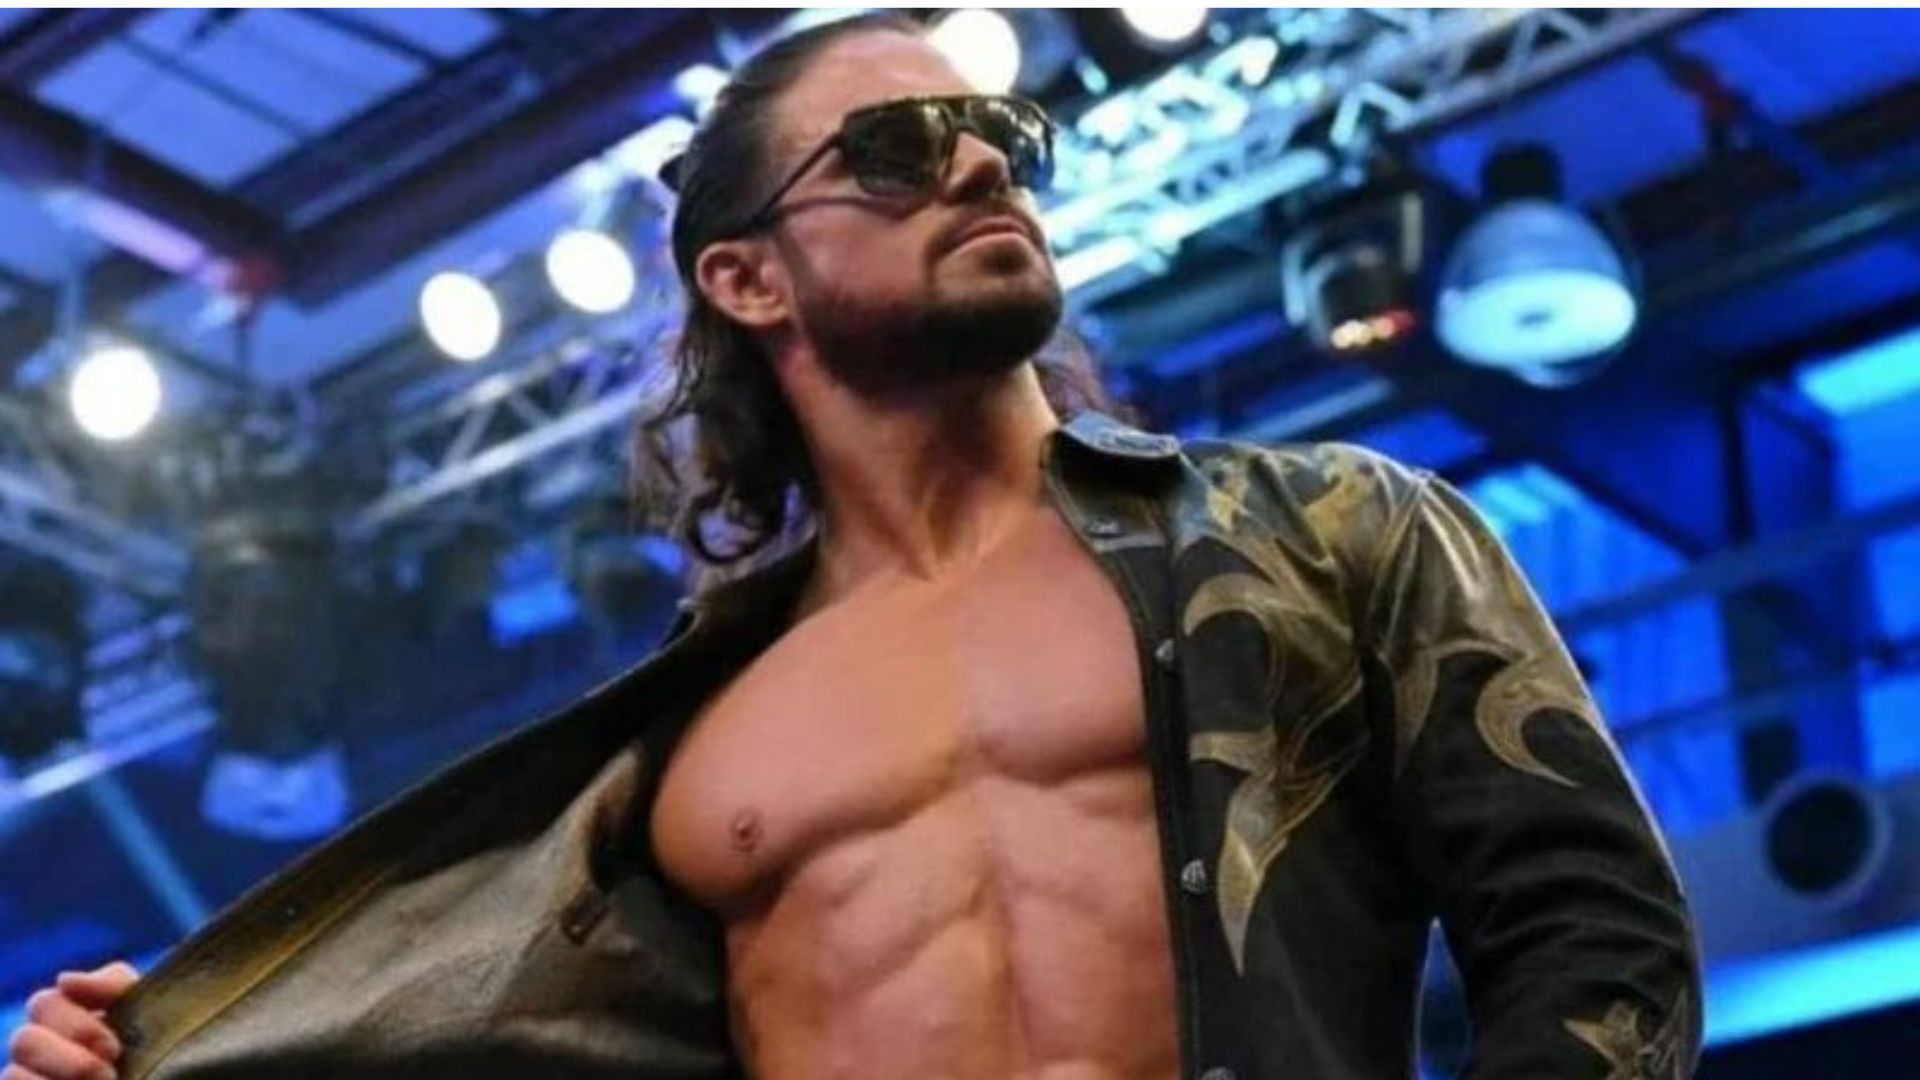 John Morrison is yet to hold the WWE or Universal Championship